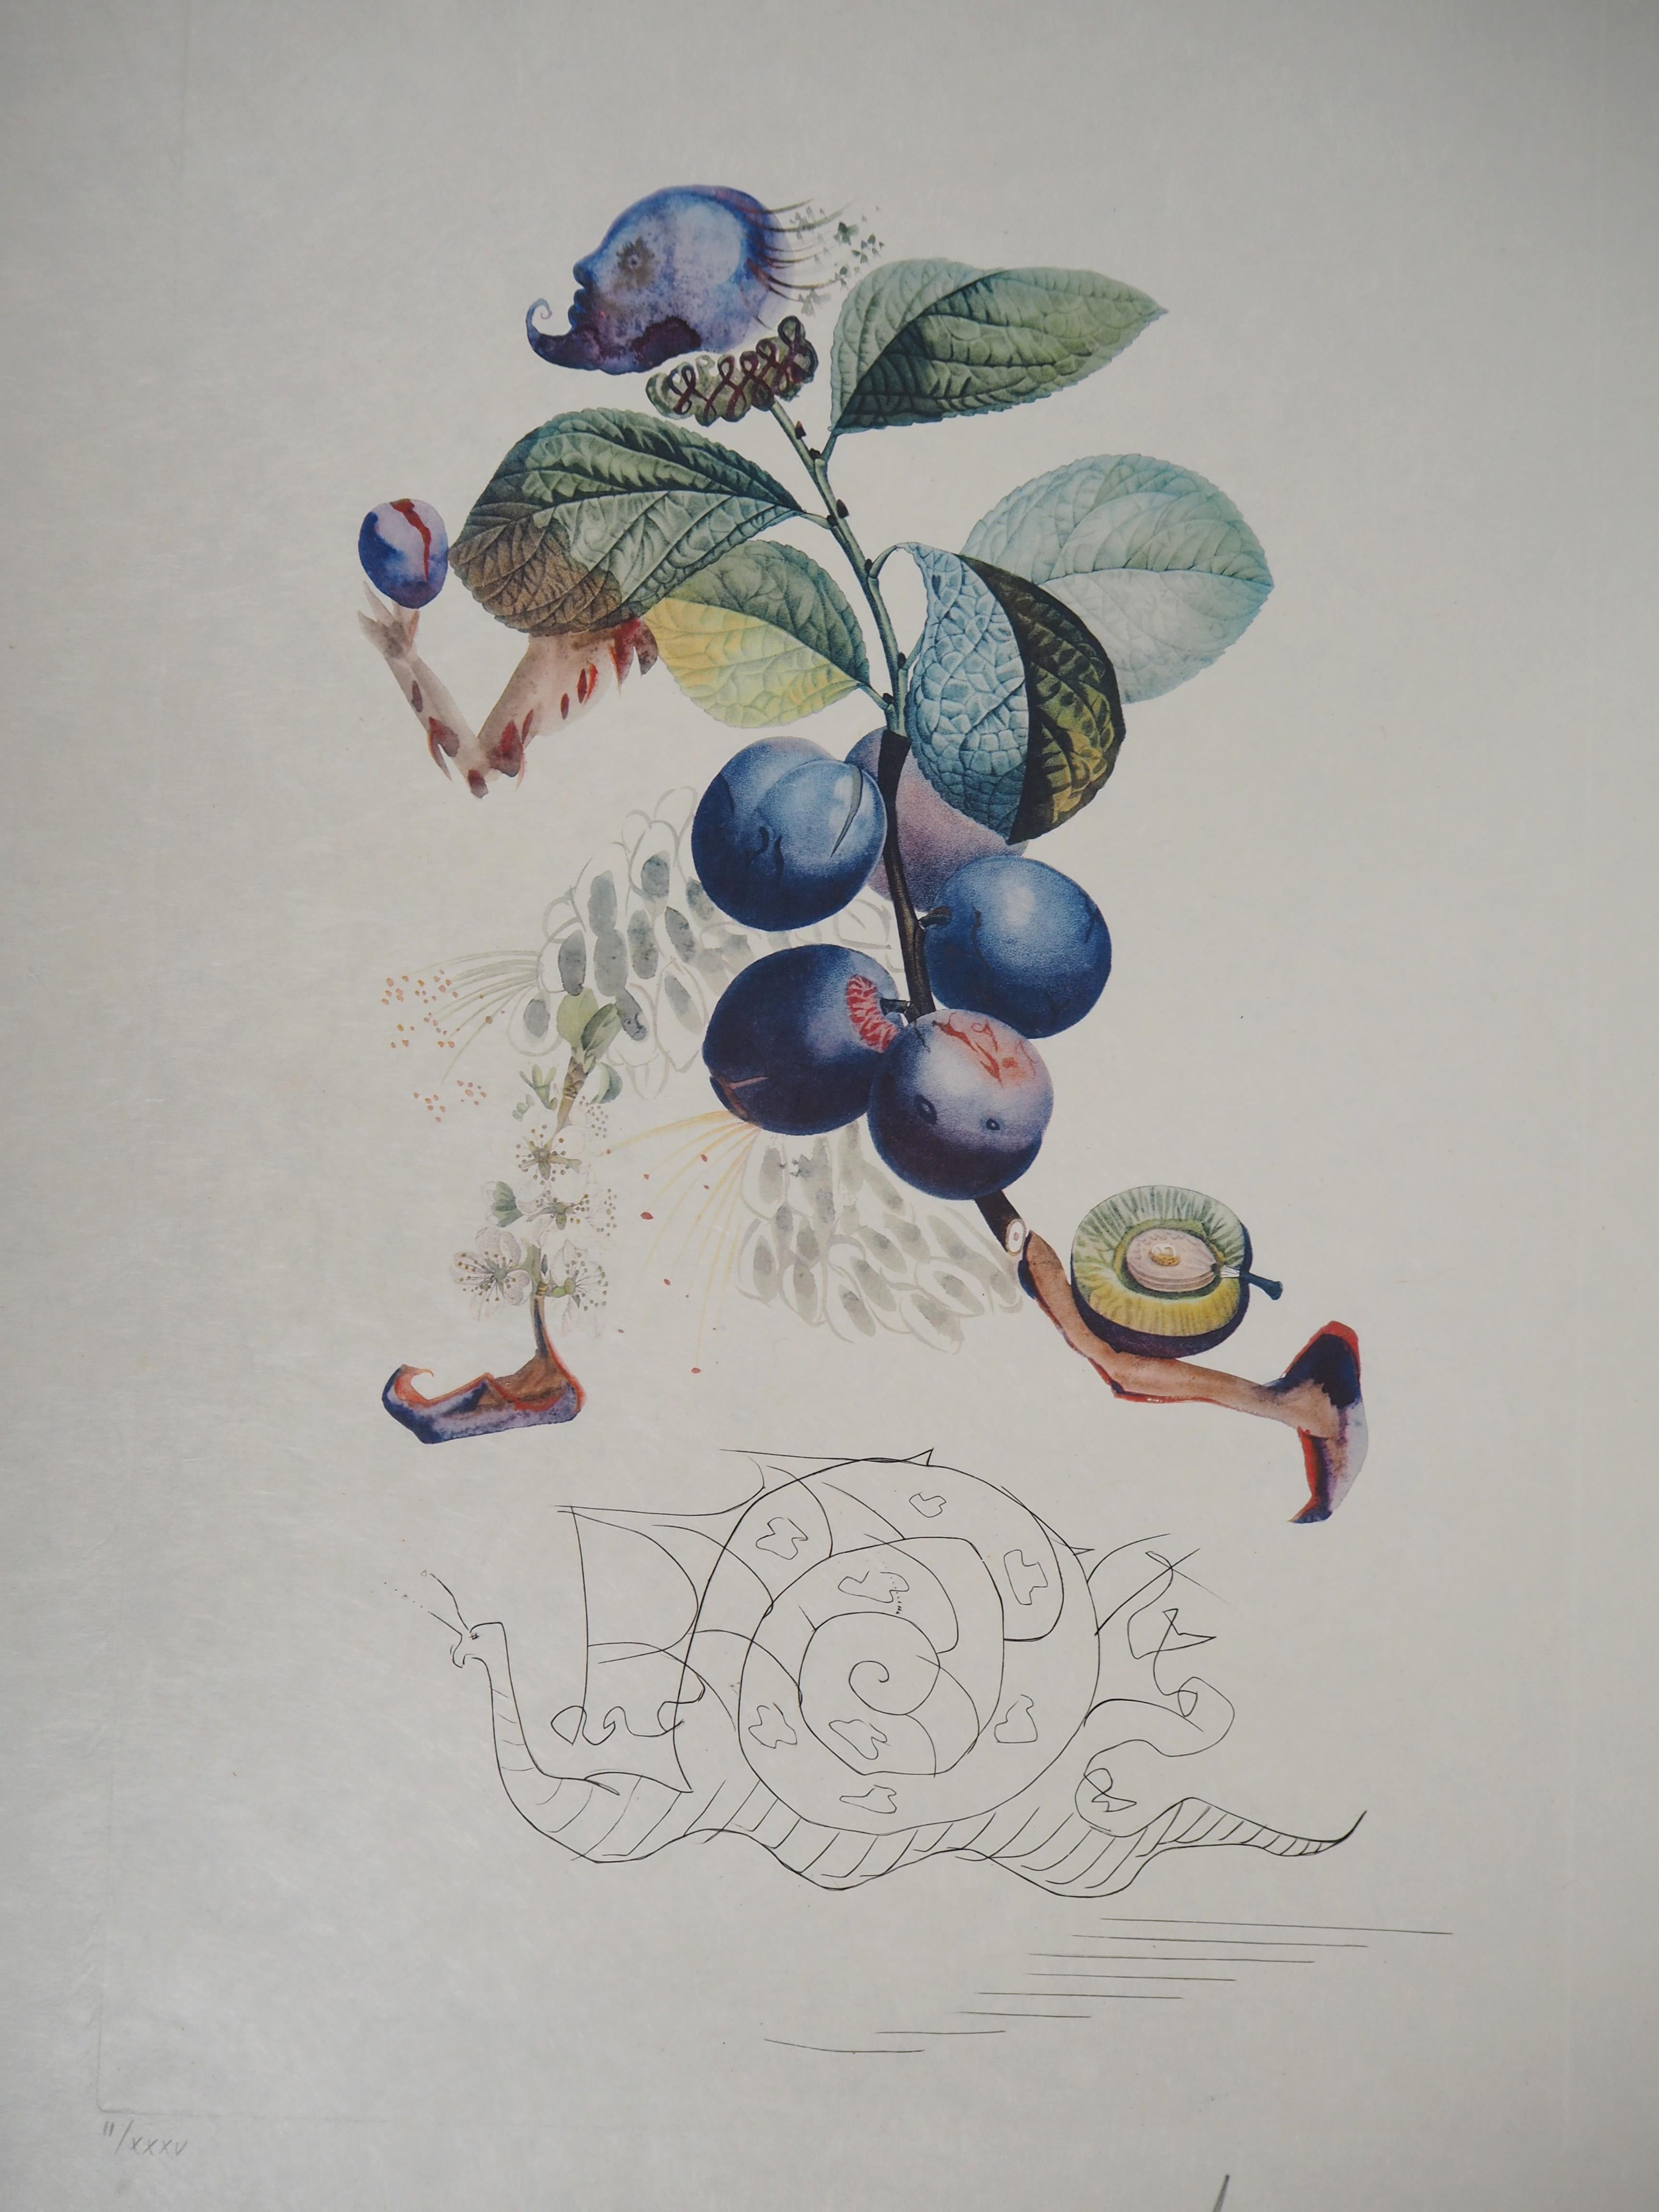 Flordali : Running Plum and Snail - Original Handsigned Etching (Field 69-11C) - Print by Salvador Dalí